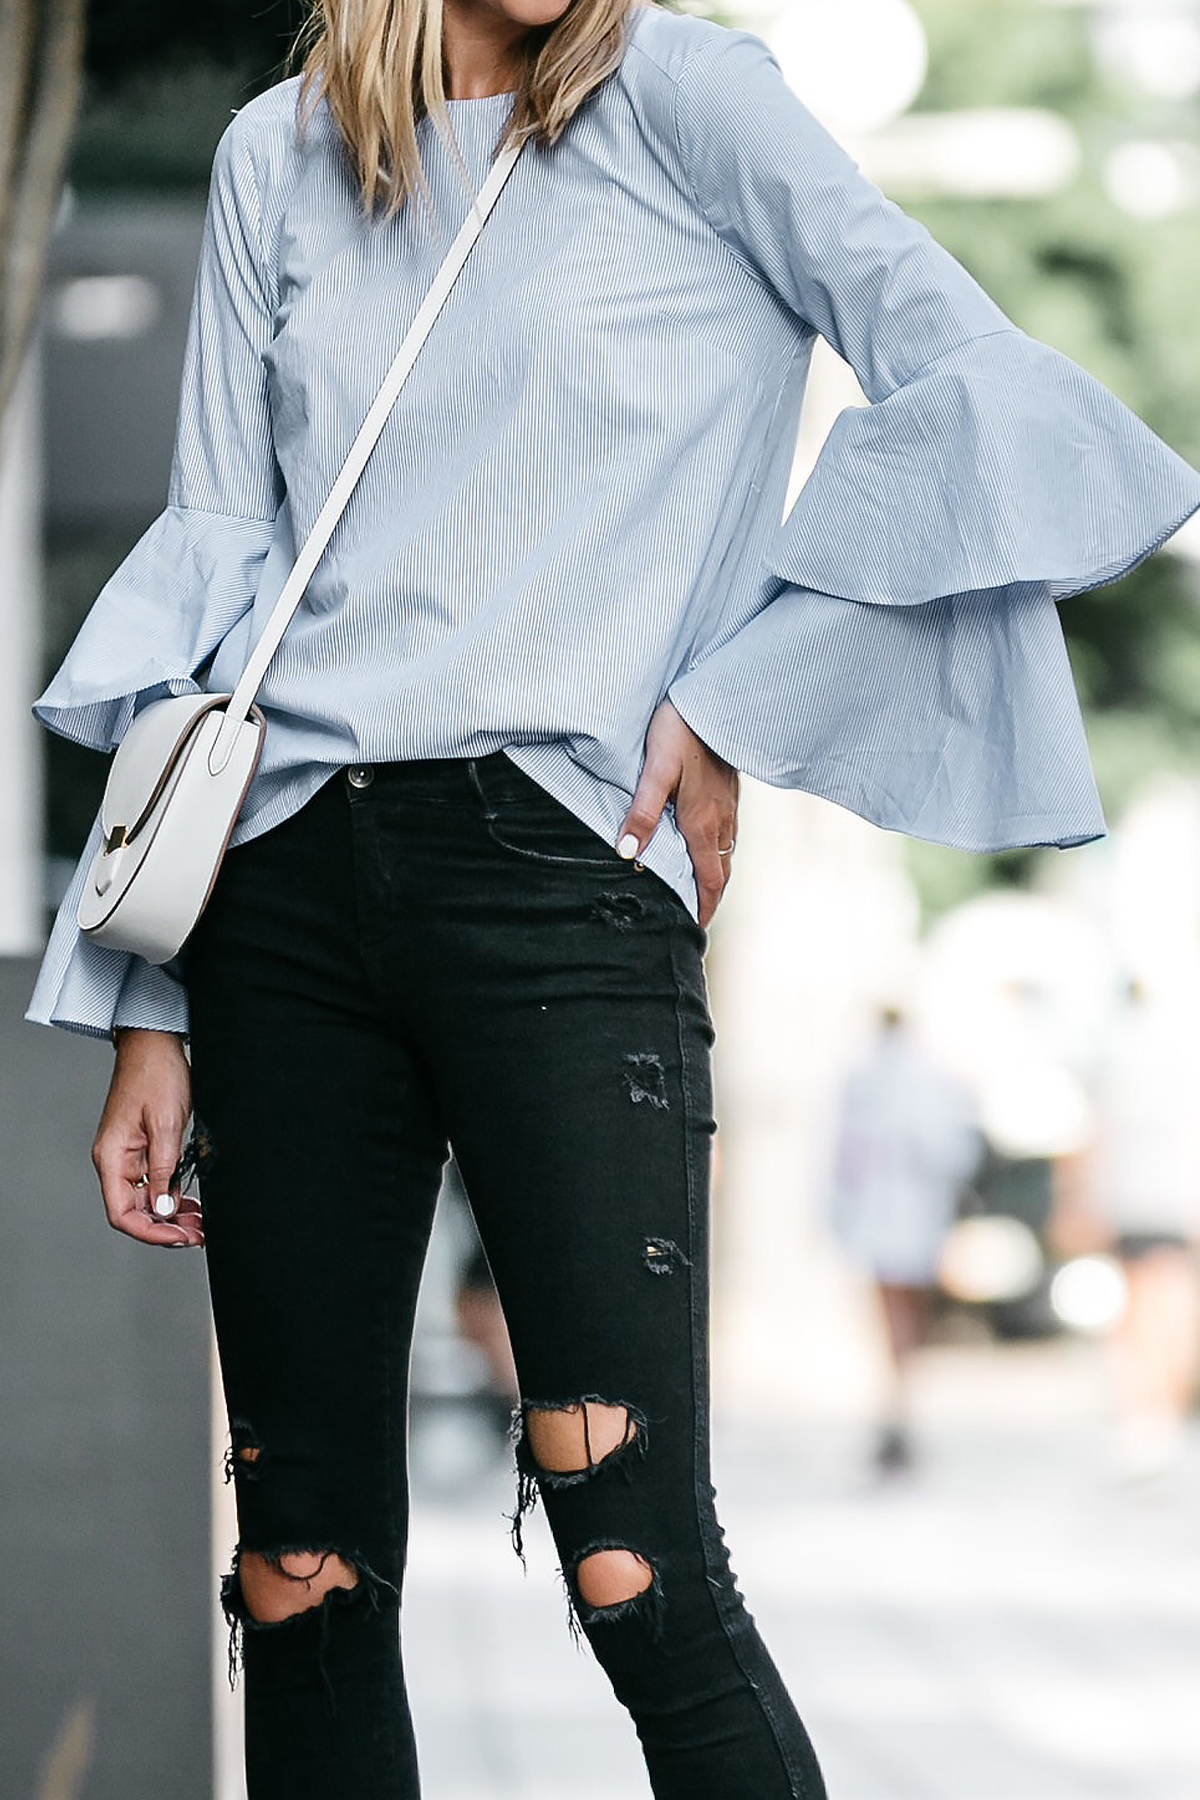 Nordstrom Blue Bell Sleeve Top Black Ripped Skinny Jeans Outfit Fashion Jackson Dallas Blogger Fashion Blogger Street Style